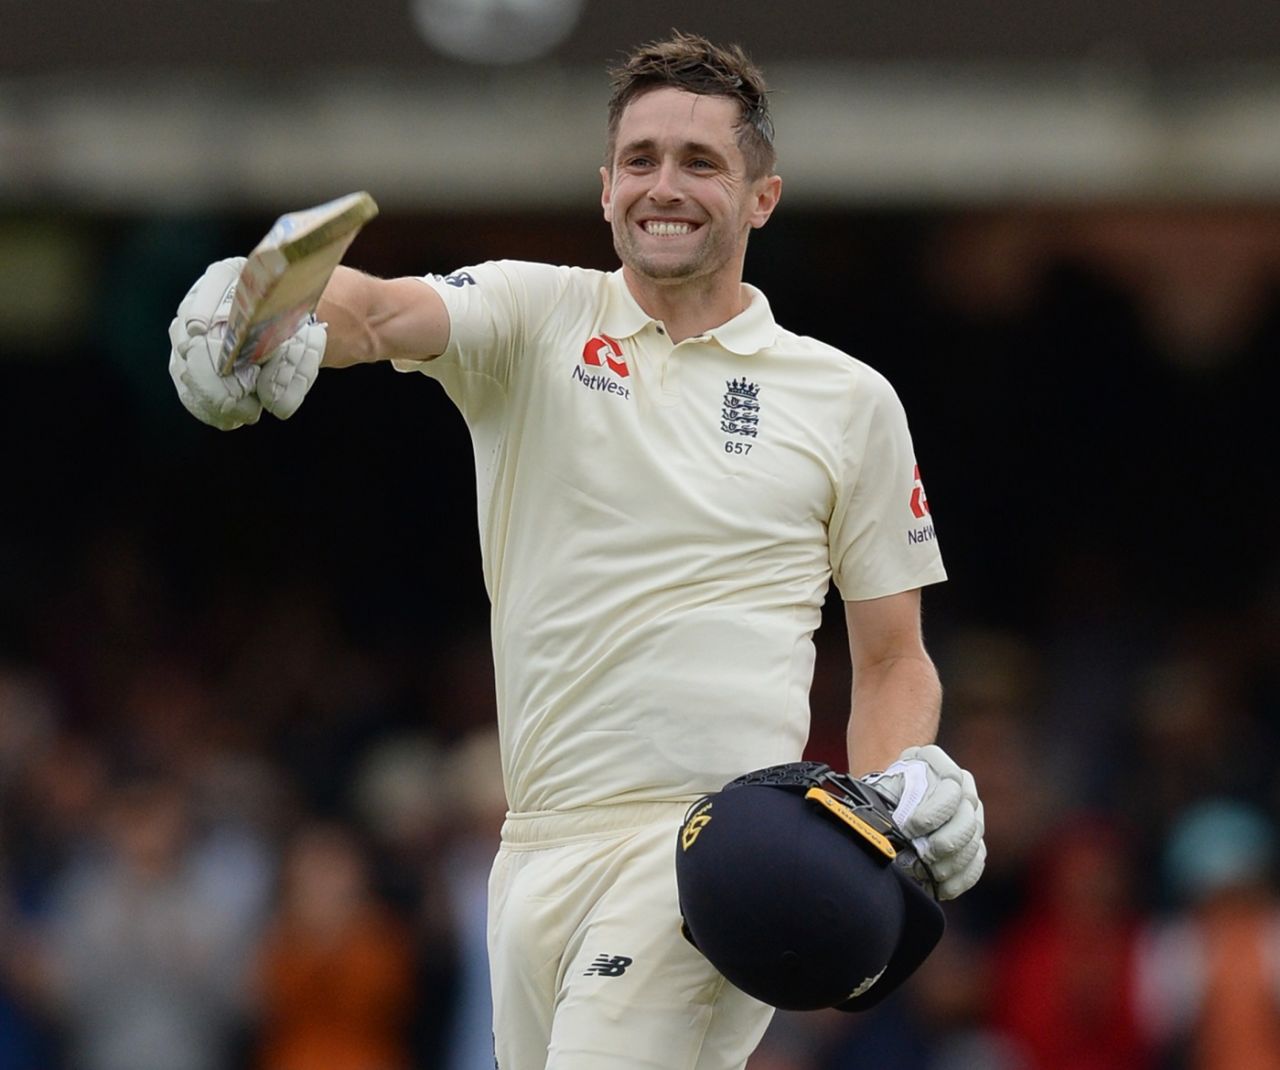 Chris Woakes celebrates reaching a century, England v India, 2nd Test, Lord's, 3rd day, August 11, 2018